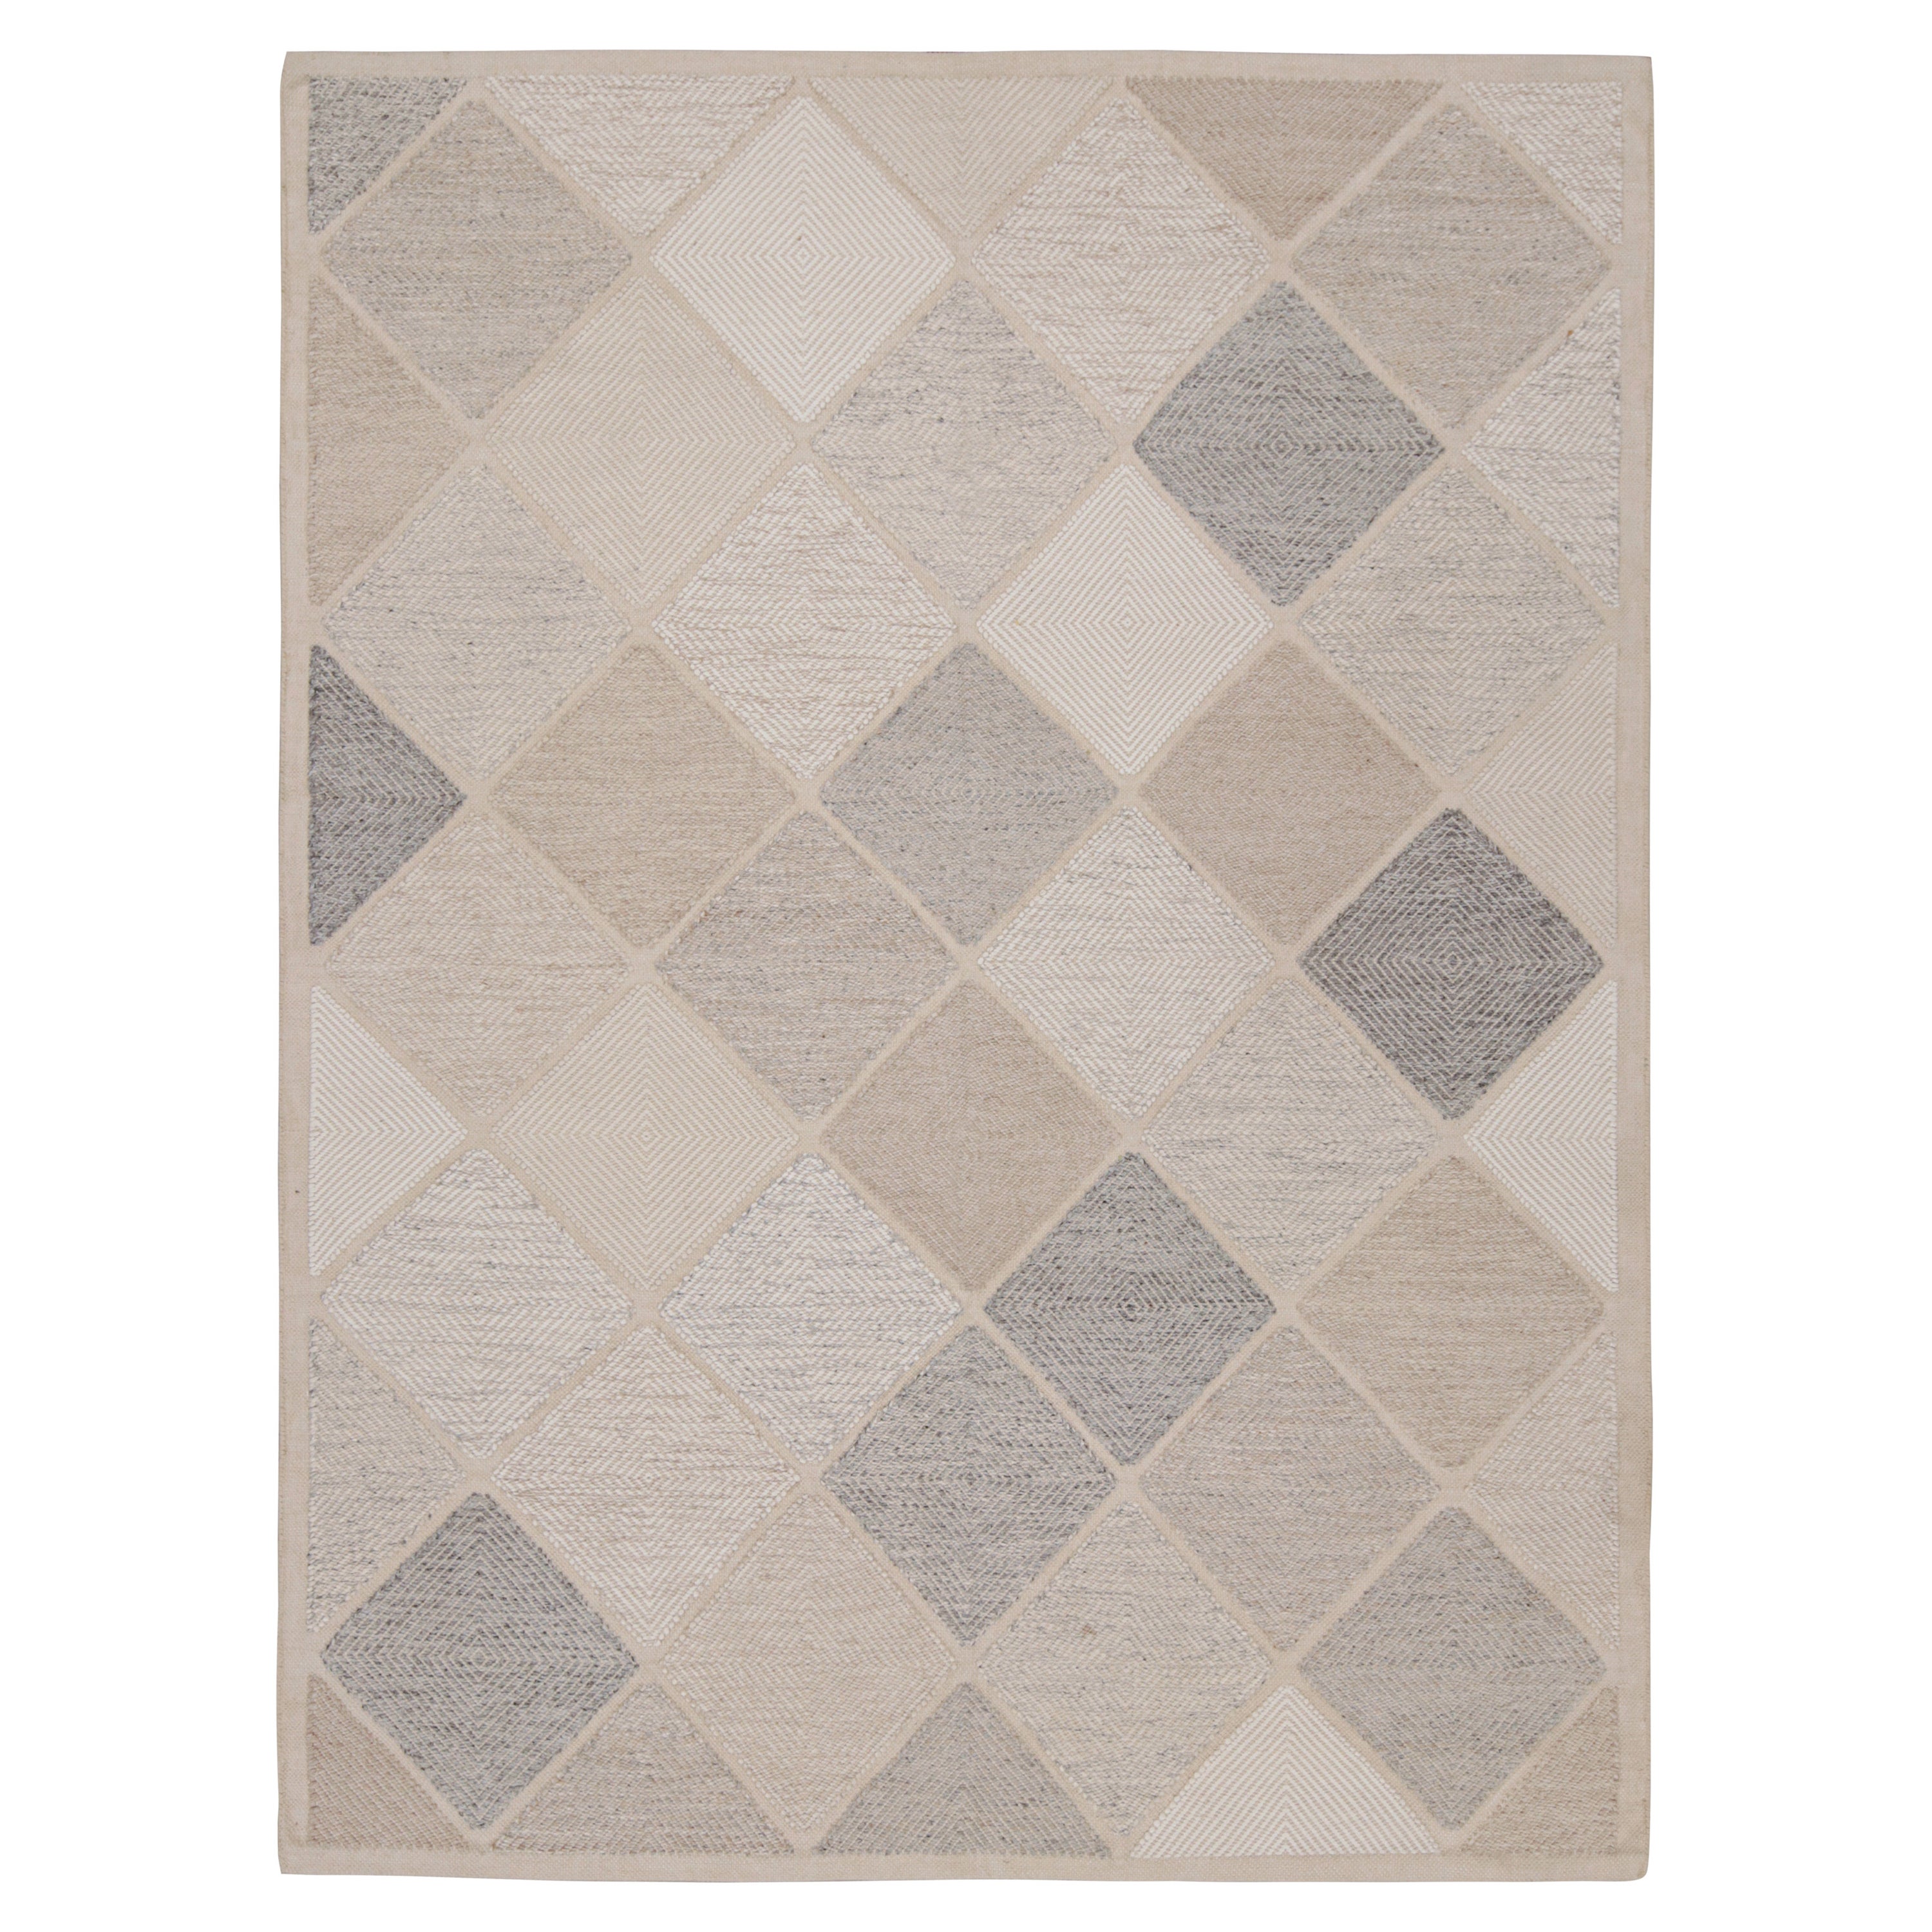 Rug & Kilim’s Scandinavian Style Rug in Beige, with Diamond Patterns For Sale